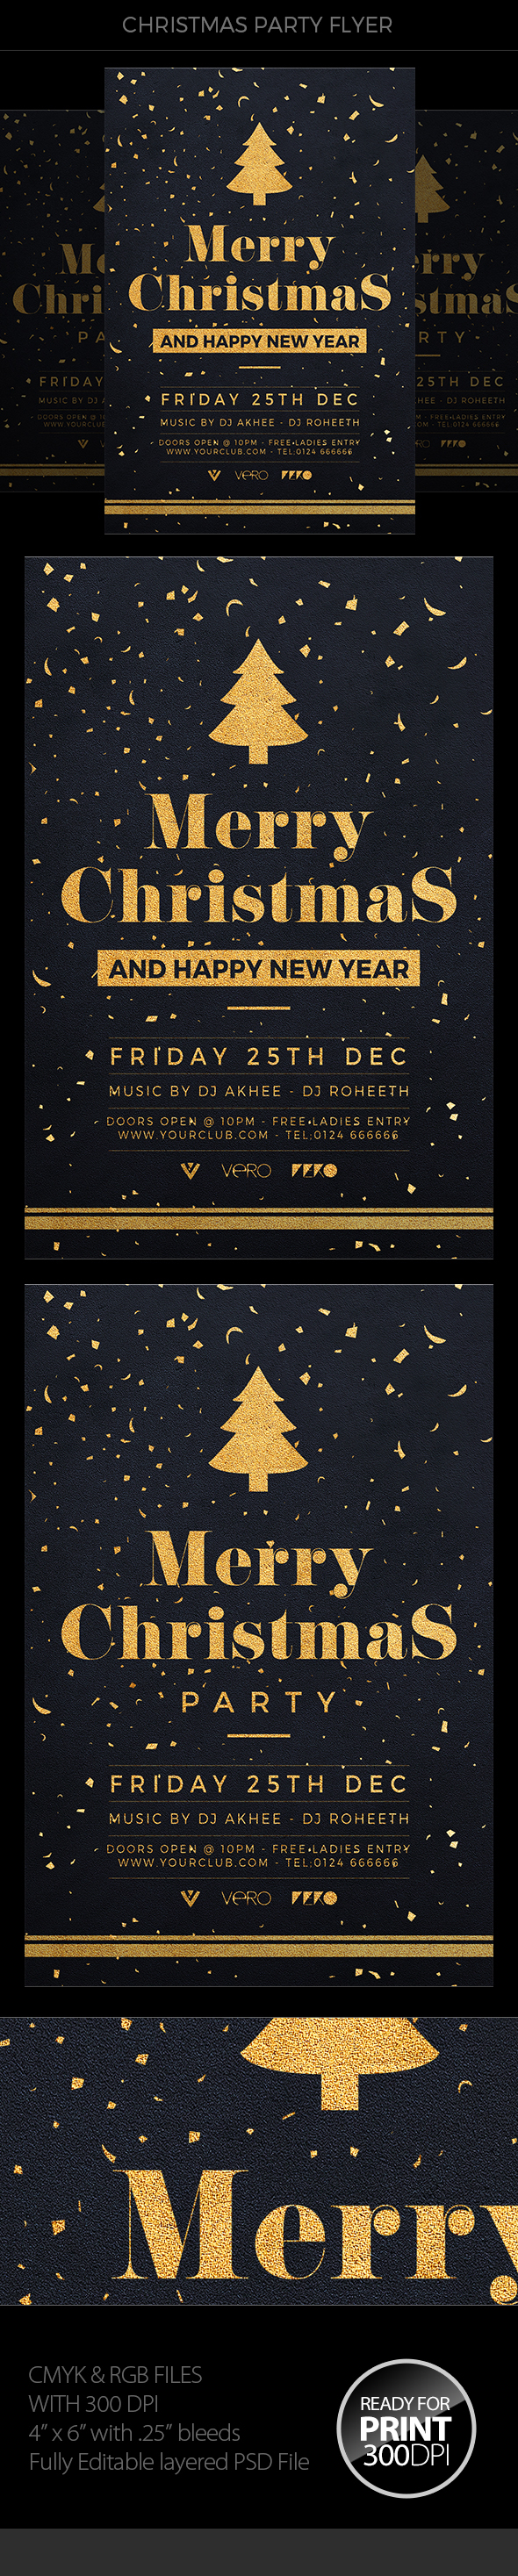 free flyer template free FREE flyer free christmas flyer free christmas Christmas